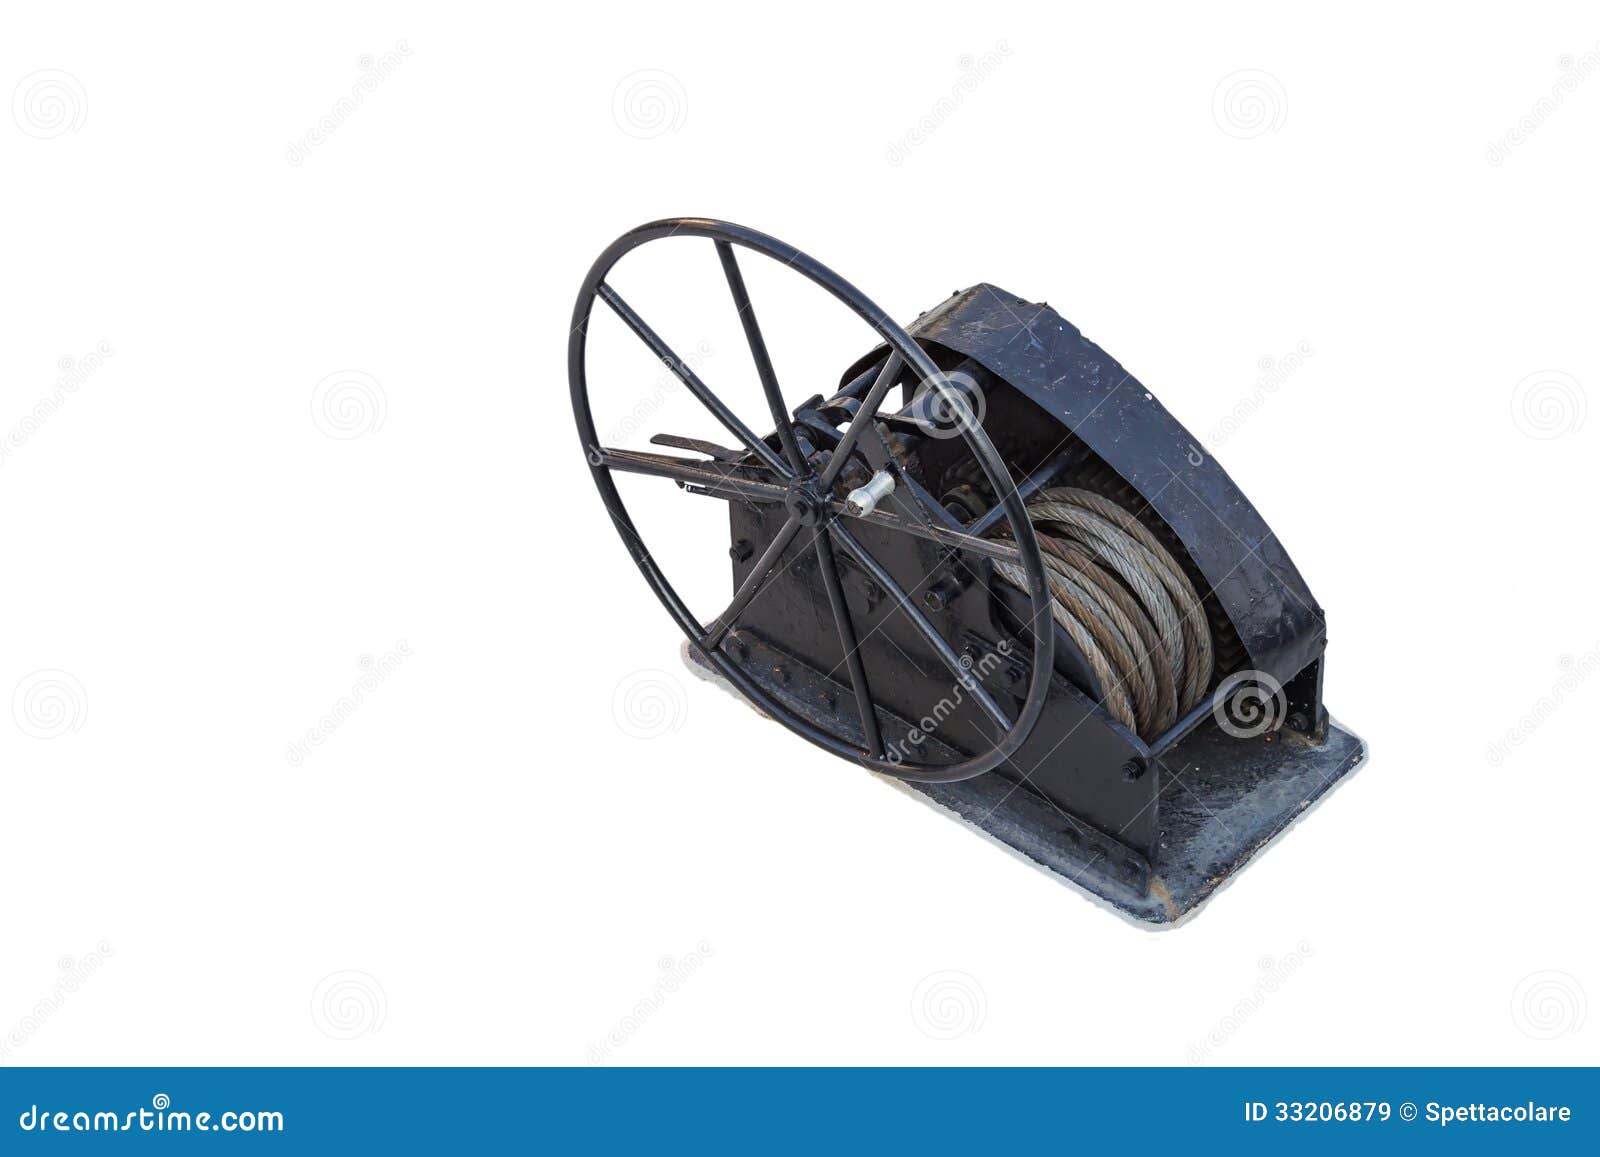 Manual Winch on board (Hand Powered winch) isolated on white.